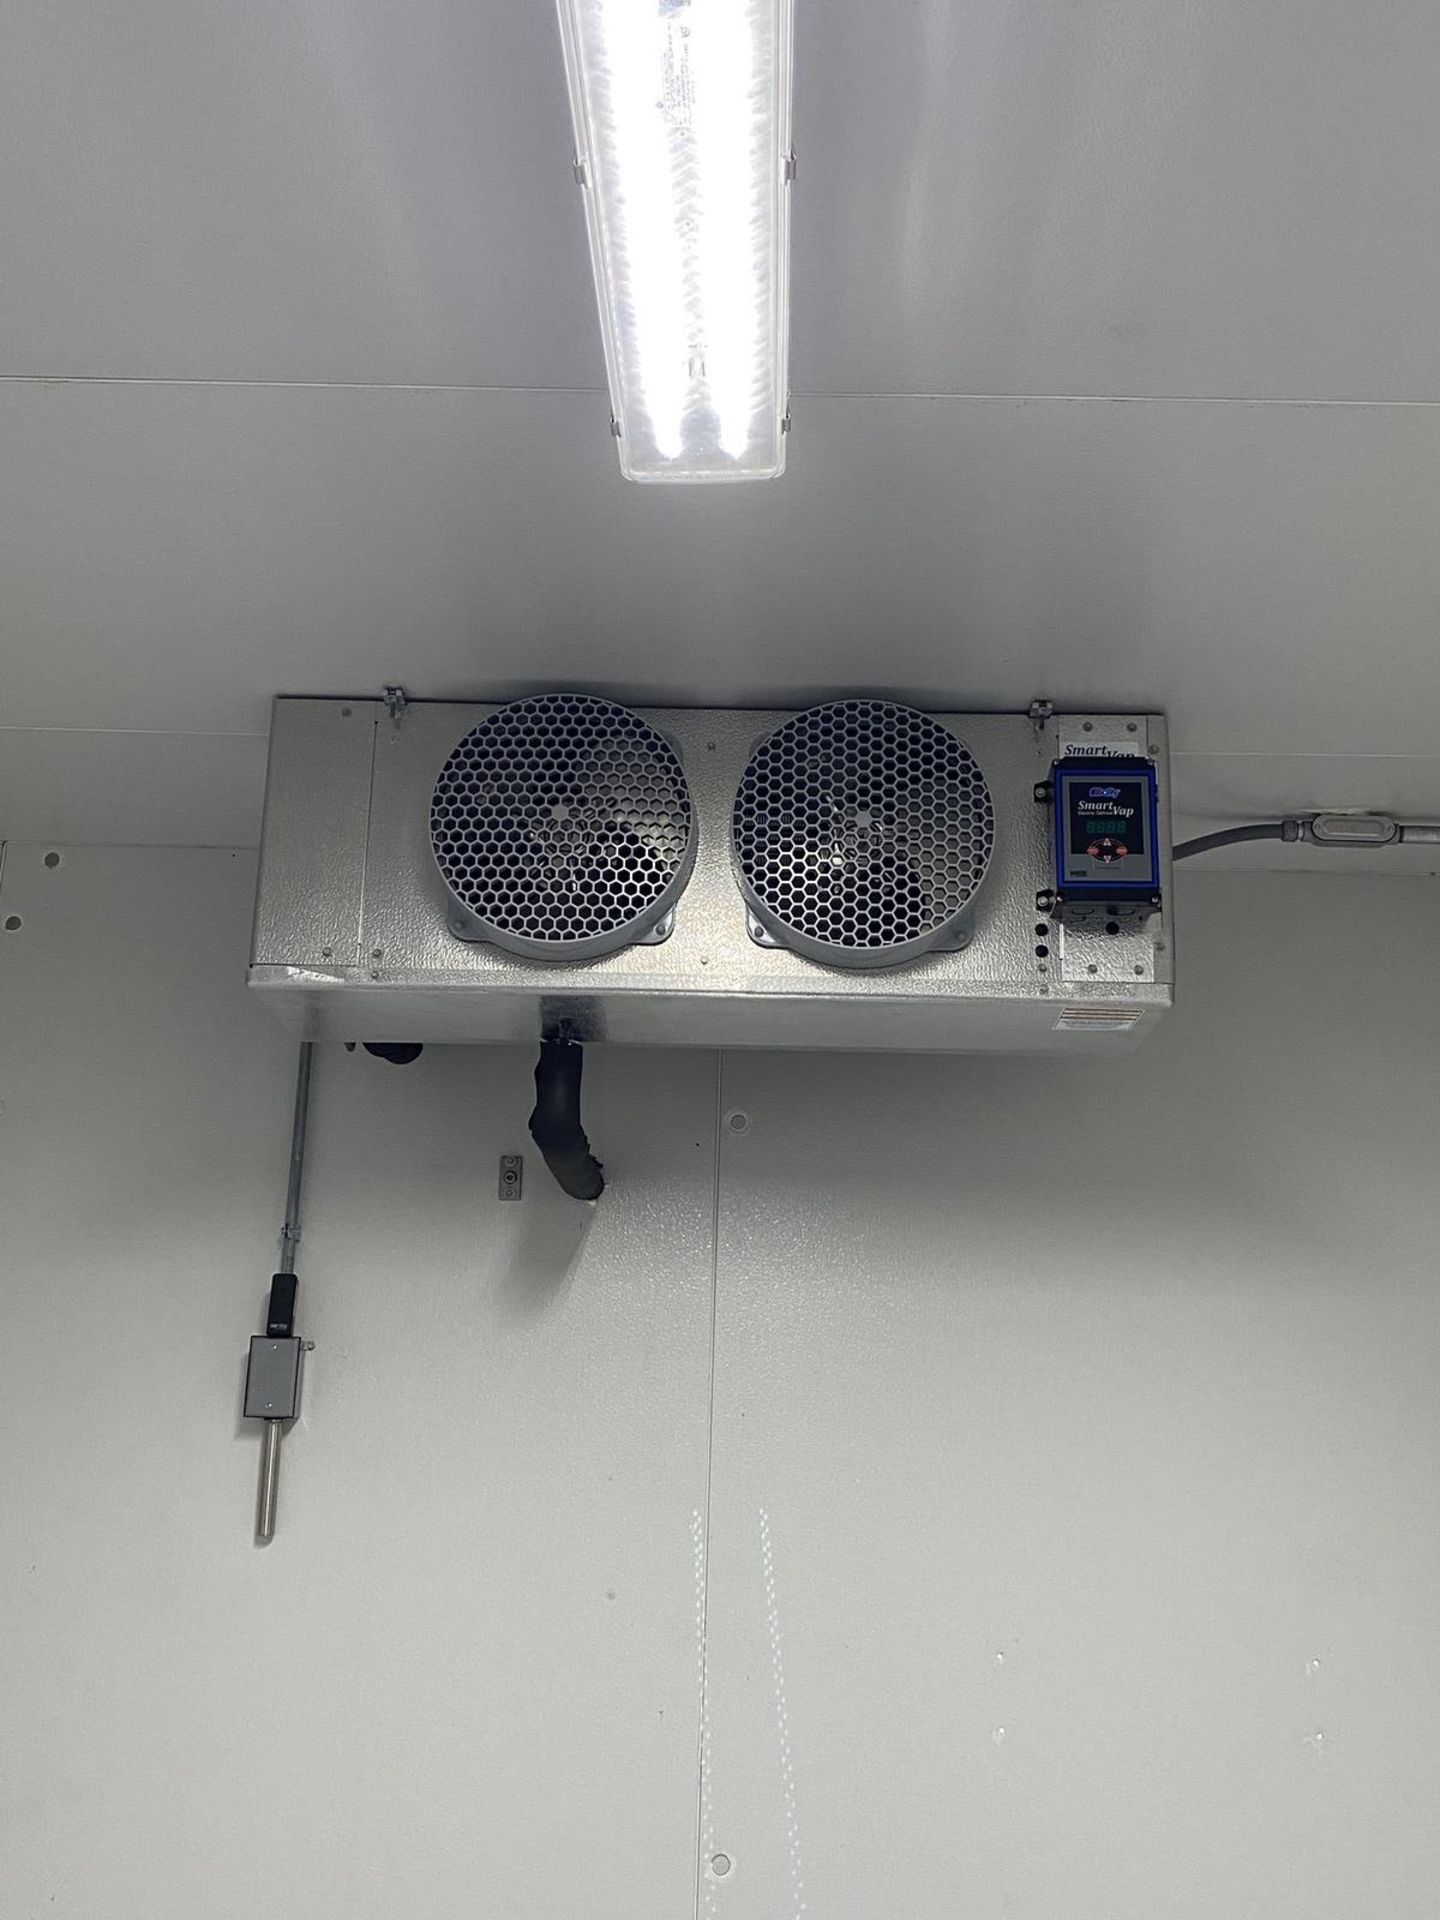 Bally Walk-In Freezer, 116"W x 128"D x 114"H with 2 Blower Condenser and Trenton To | Rig Fee: $1500 - Image 4 of 7